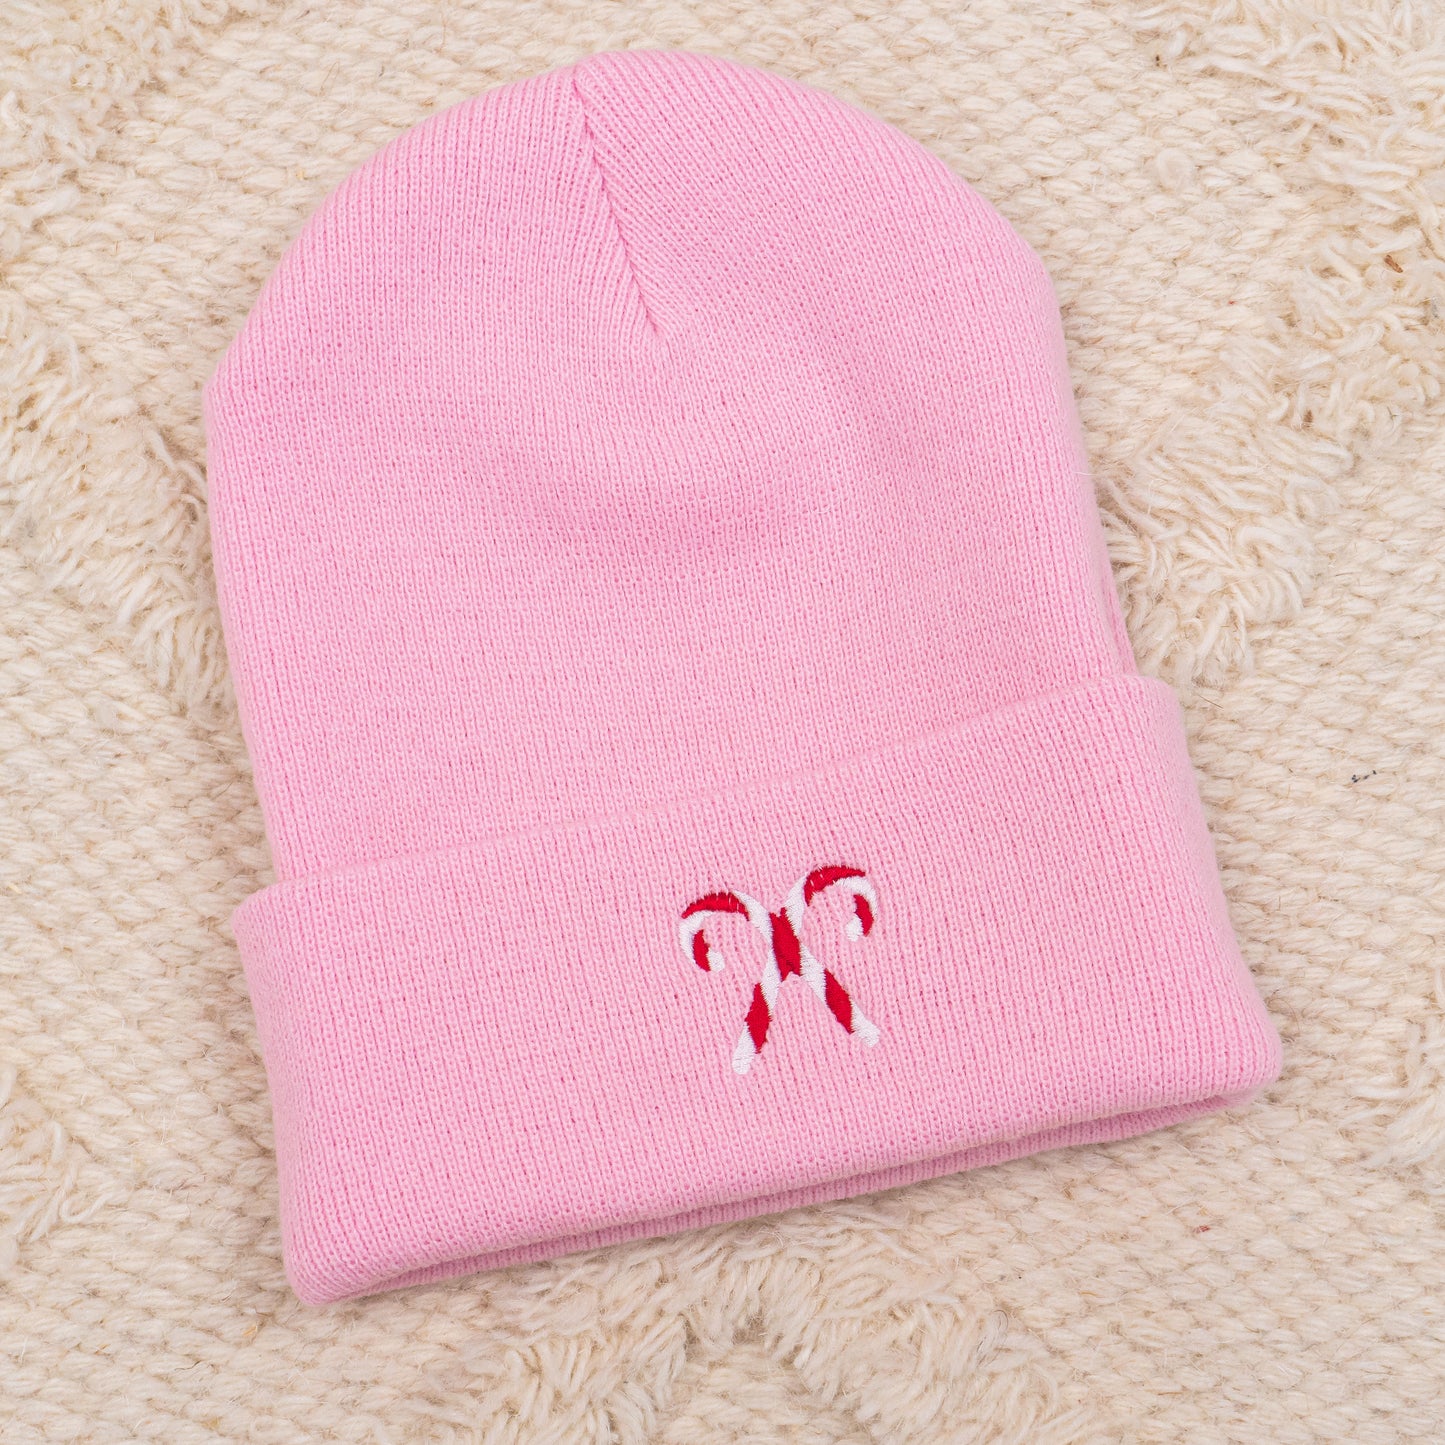 Candy Canes - Embroidered Beanie (Pink)